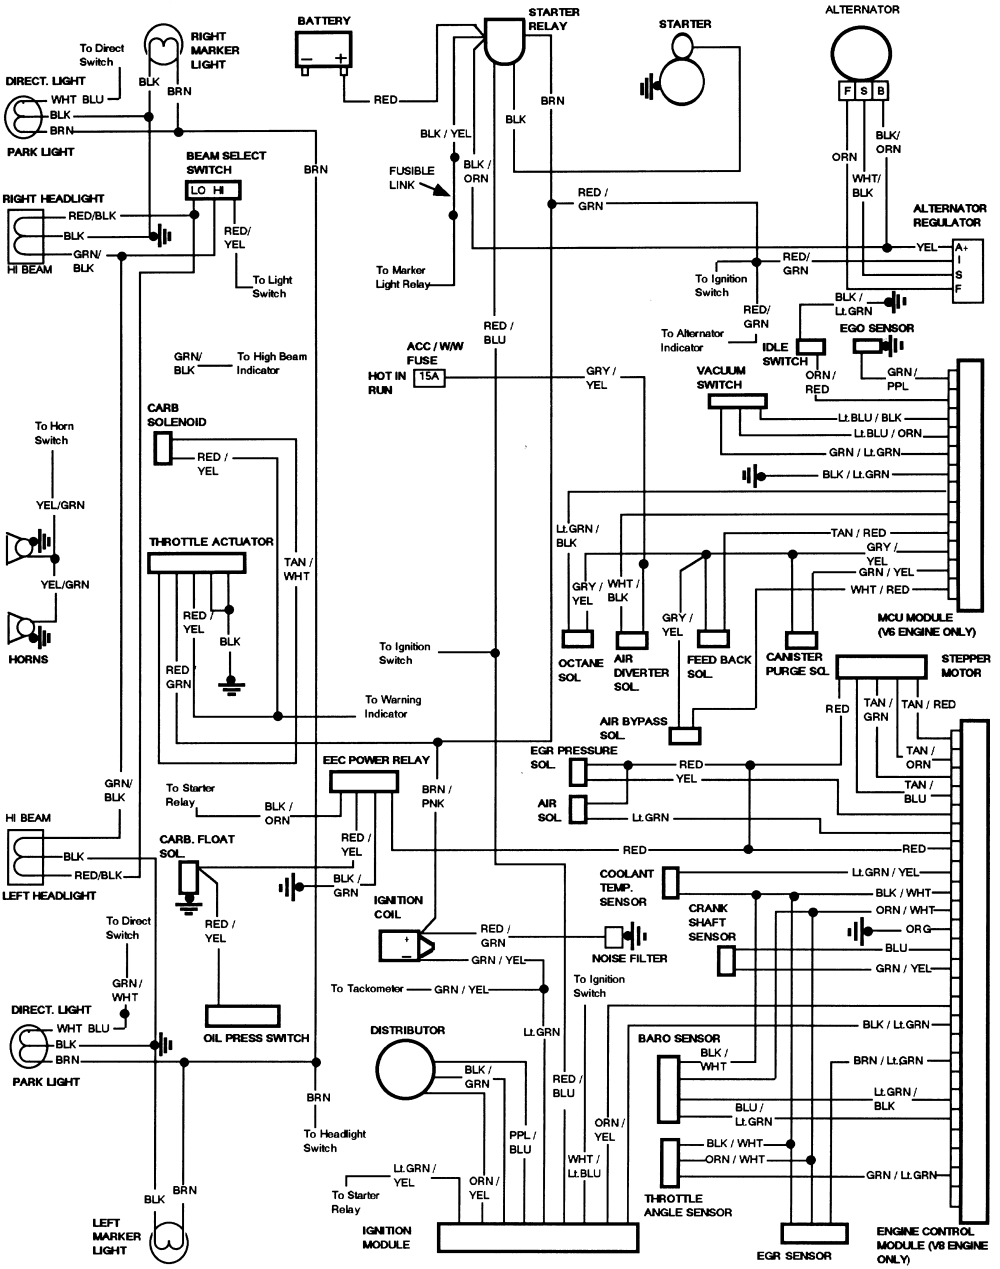 2005 Ford F150 Radio Wiring Diagram from econtent.autozone.com